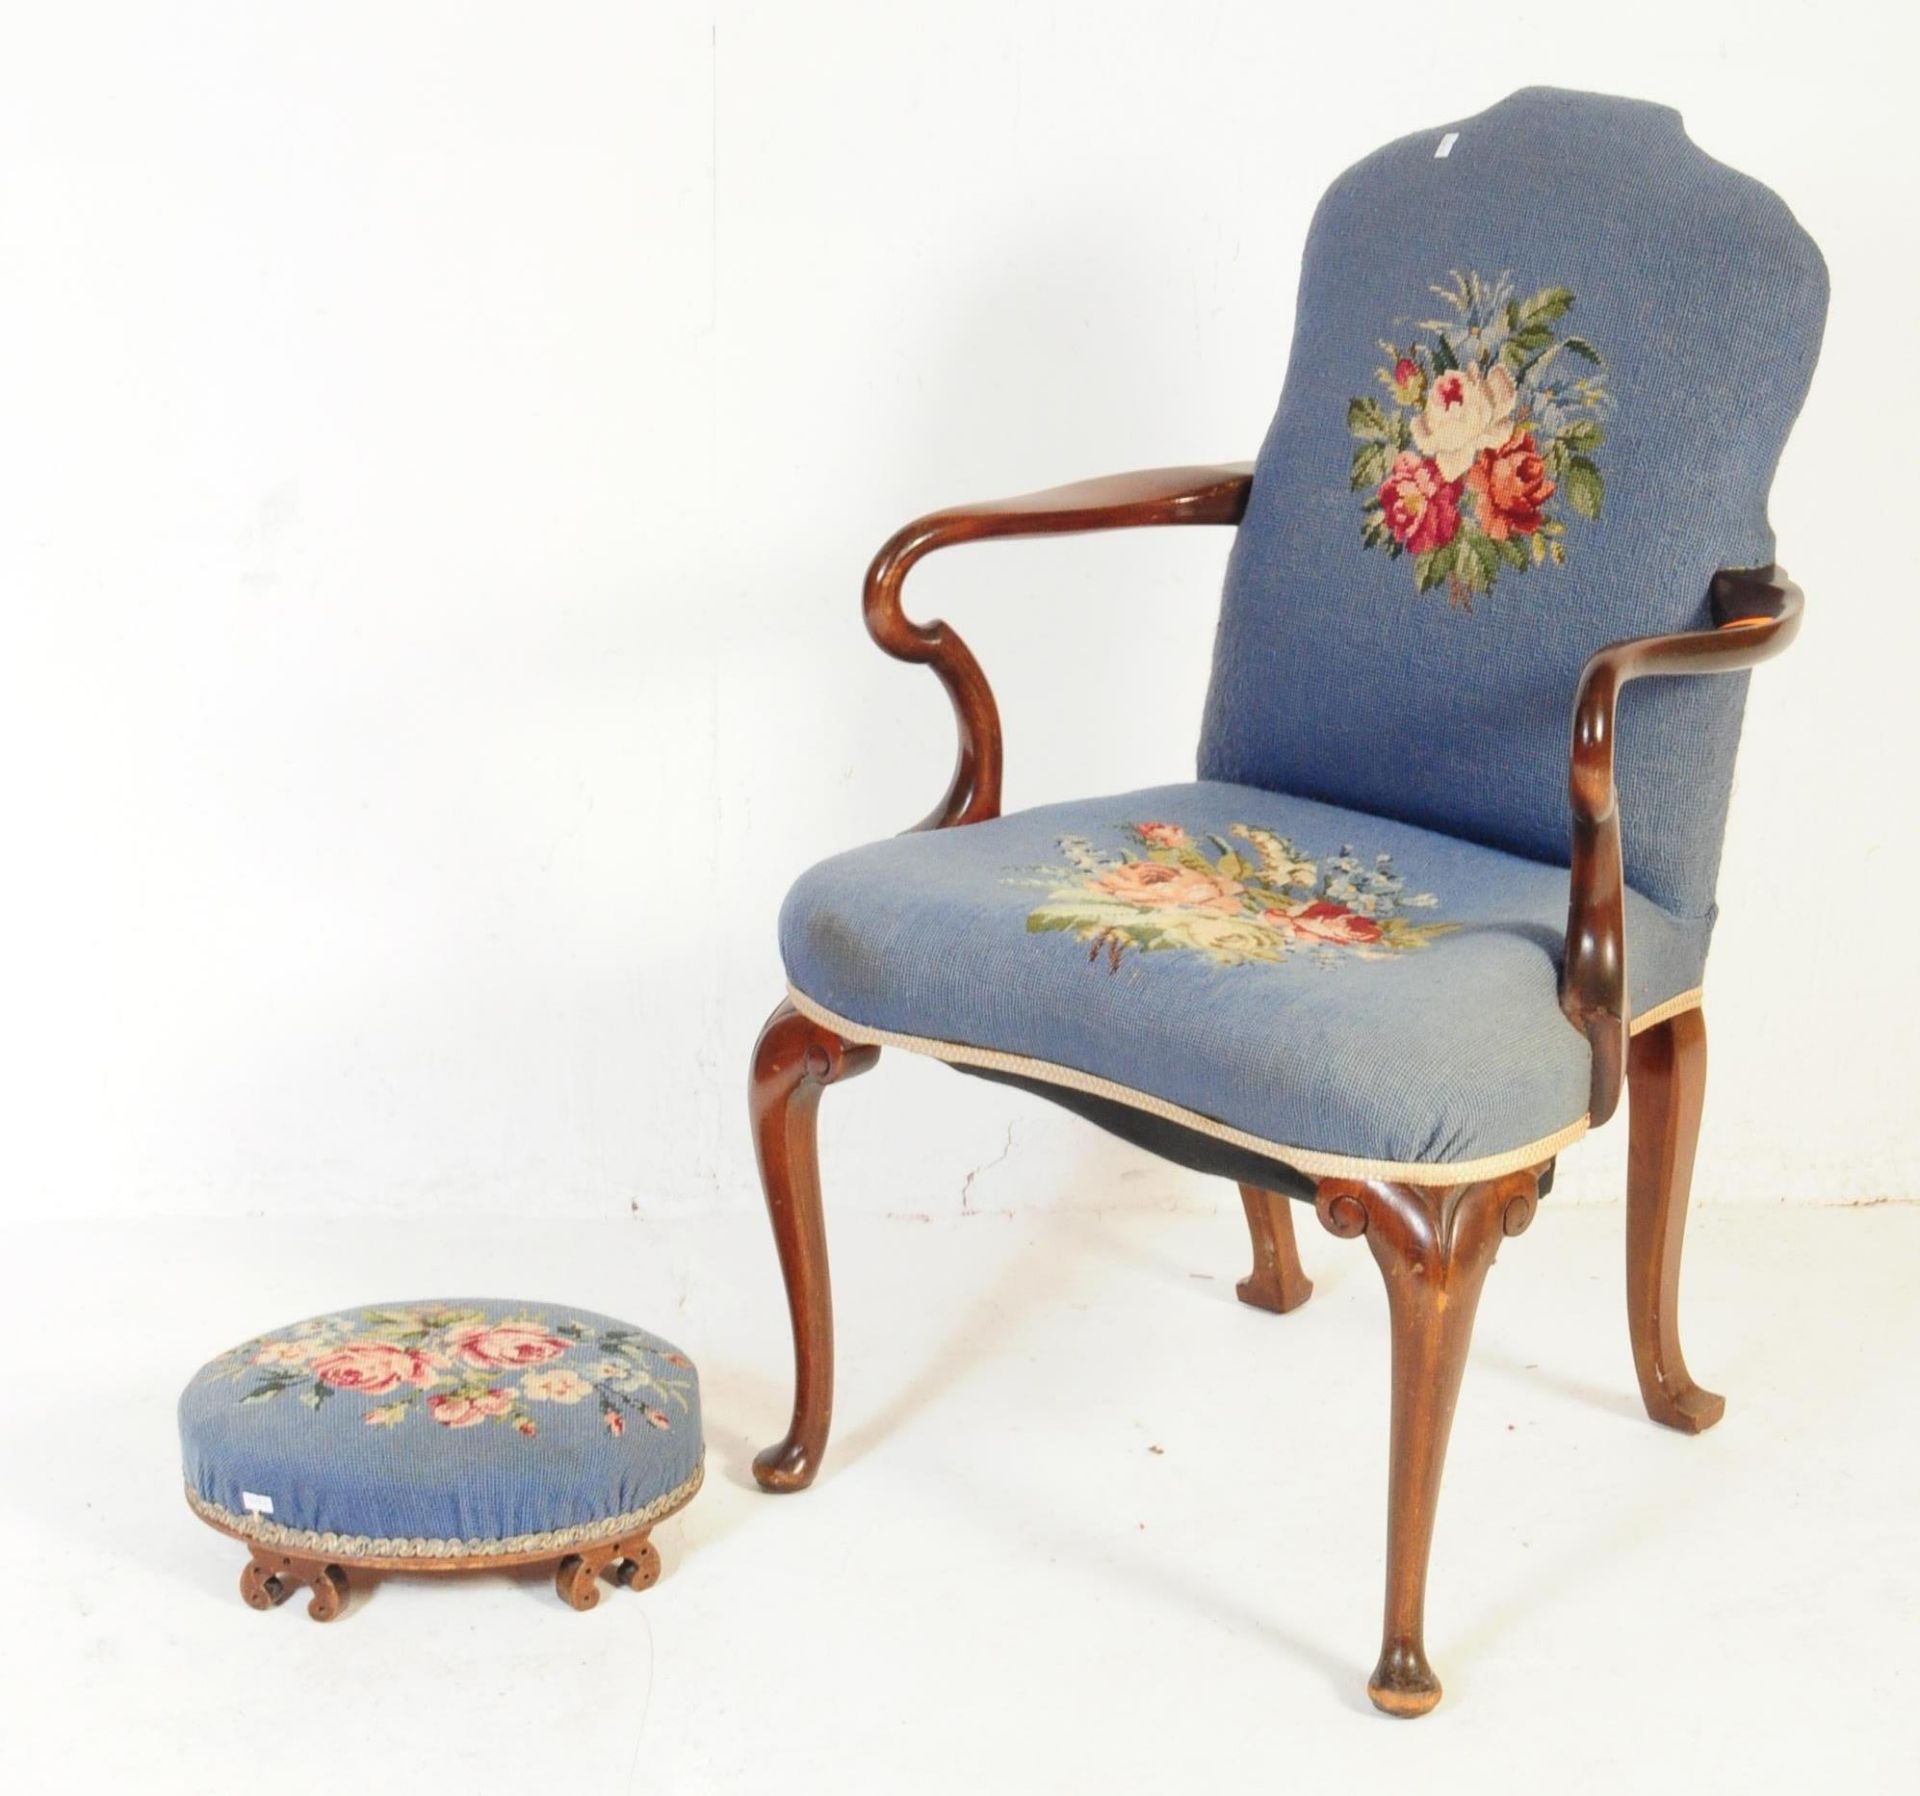 EARLY 20TH CENTURY MAHOGANY LOUNGE ARM CHAIR WITH STOOL - Image 2 of 6